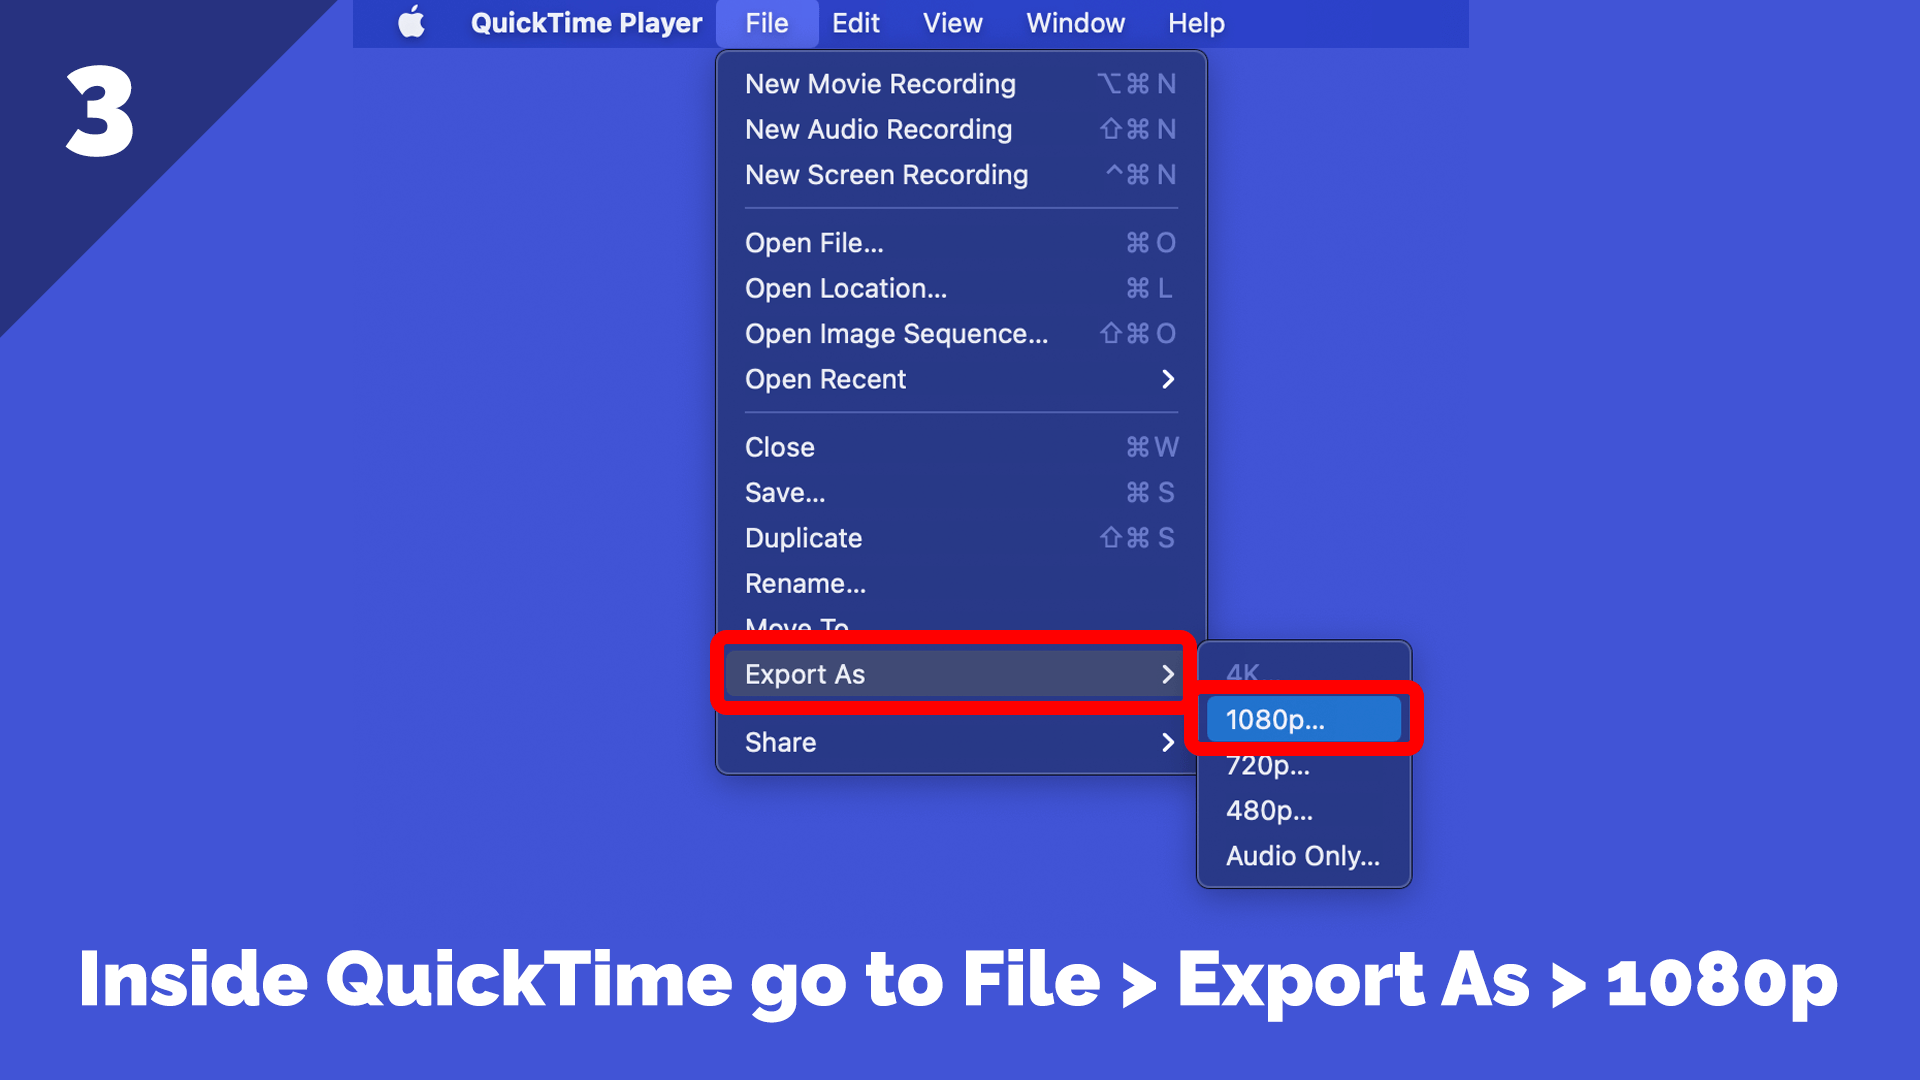 Go to File > Export As > 1080p